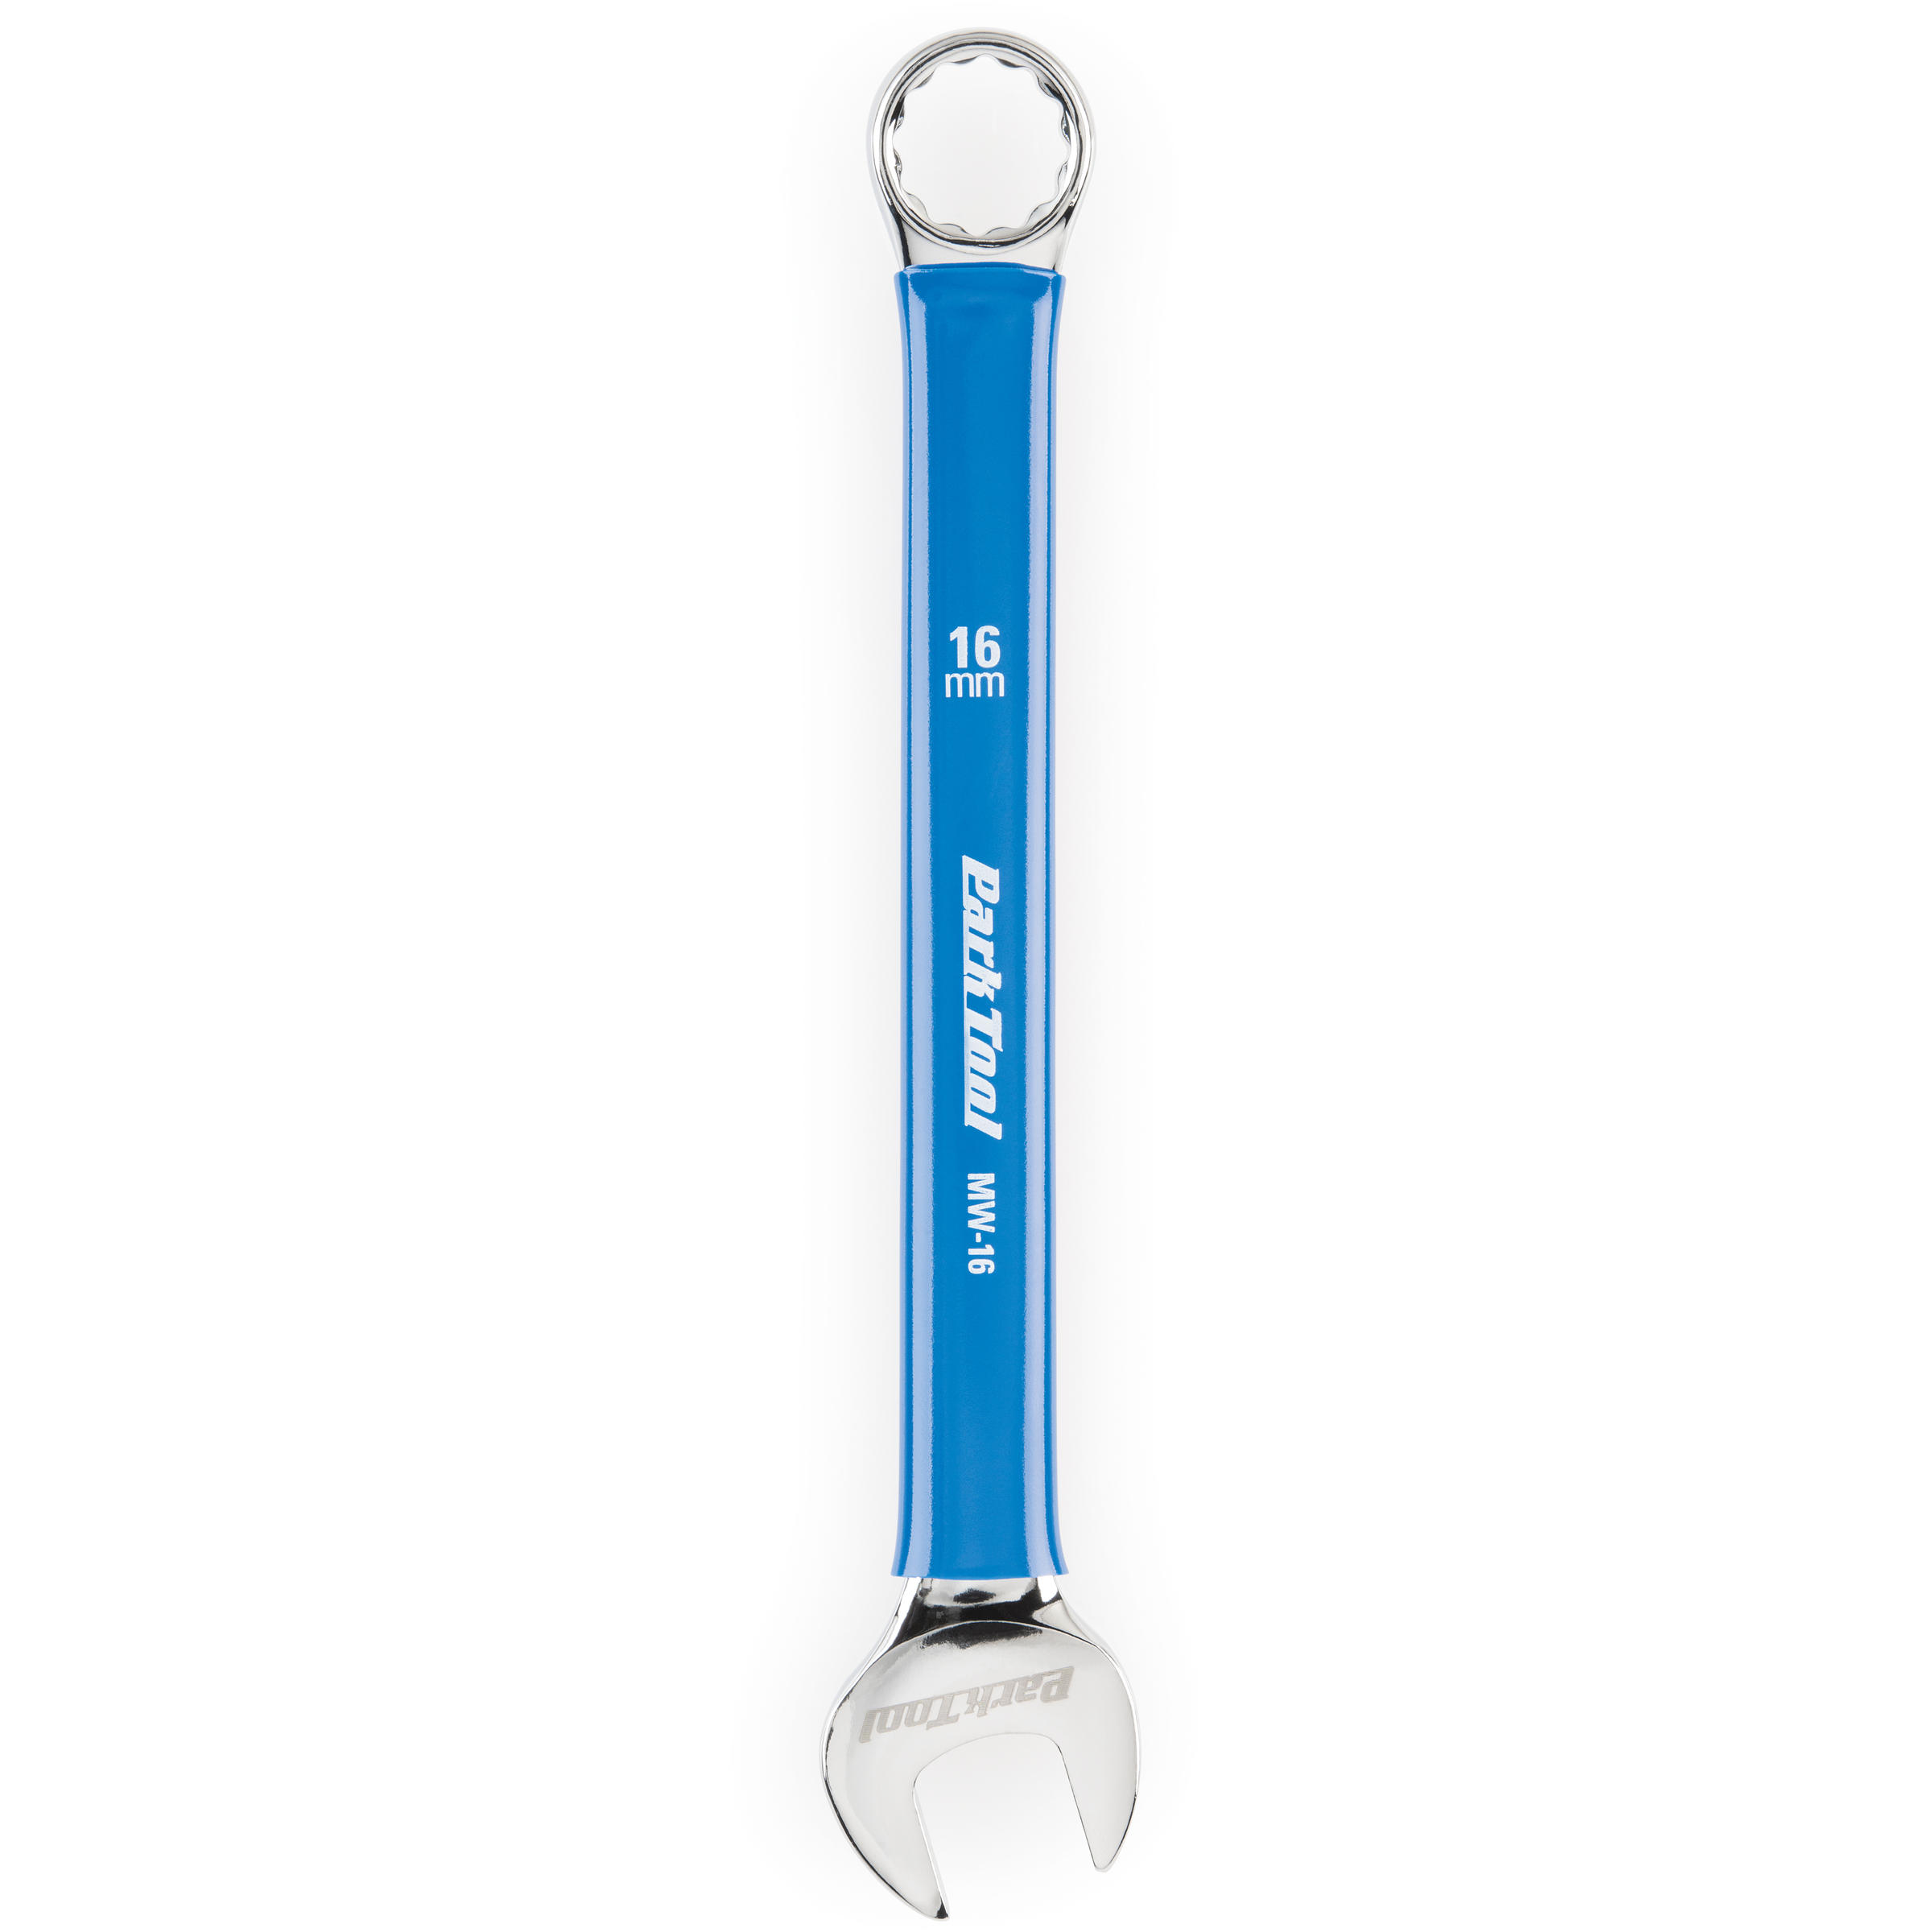 Park Tool Mw-8 Metric Wrench 8mm Blue Chrome for sale online 